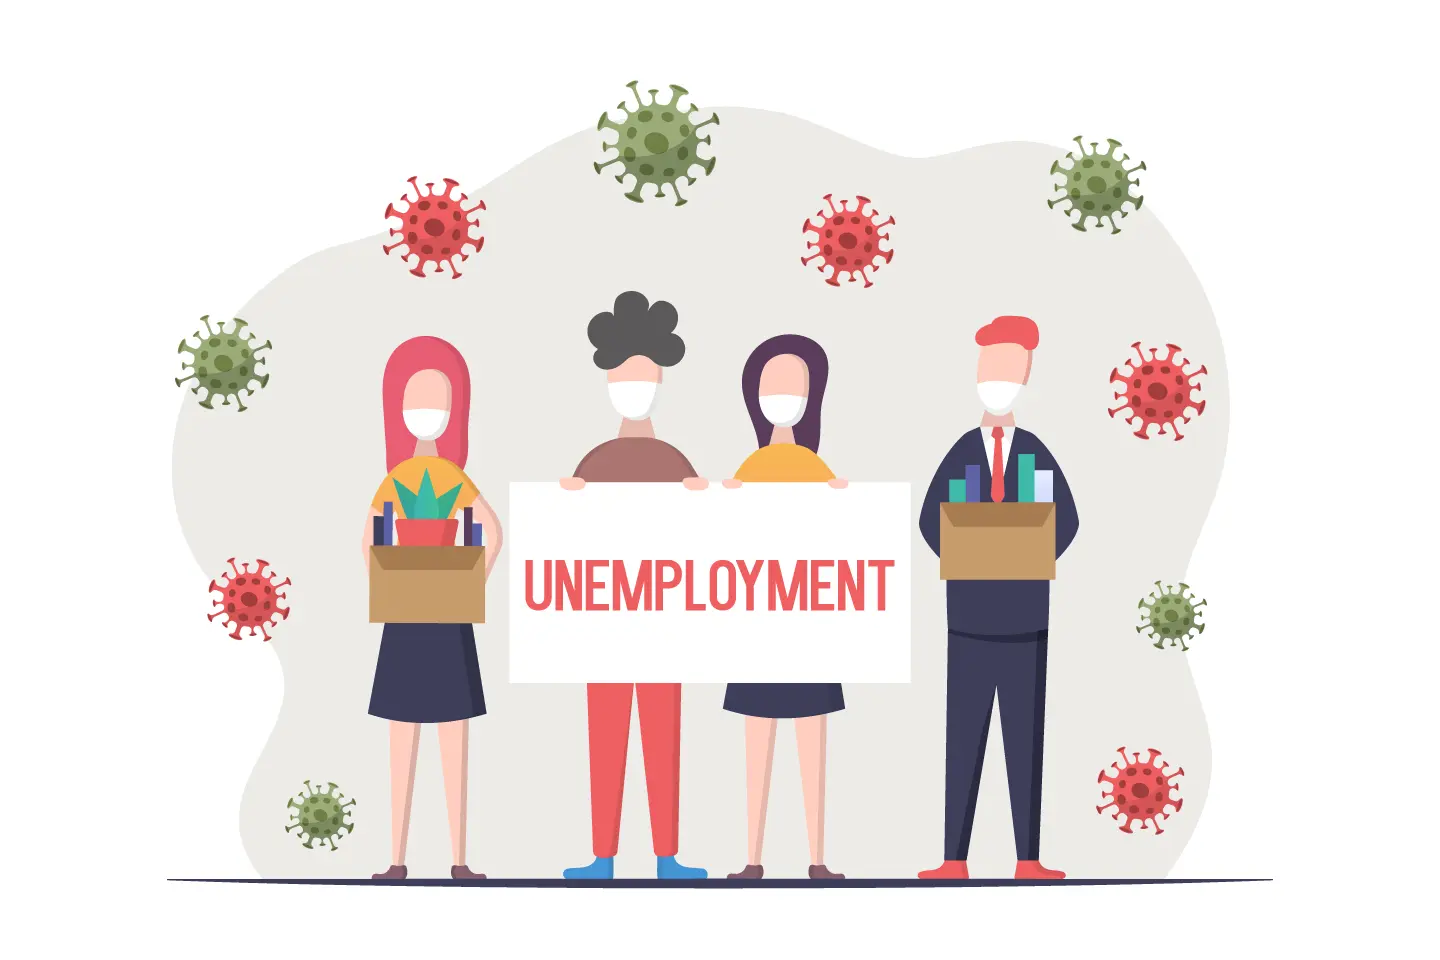 Analysis of Pandemic and Unemployment